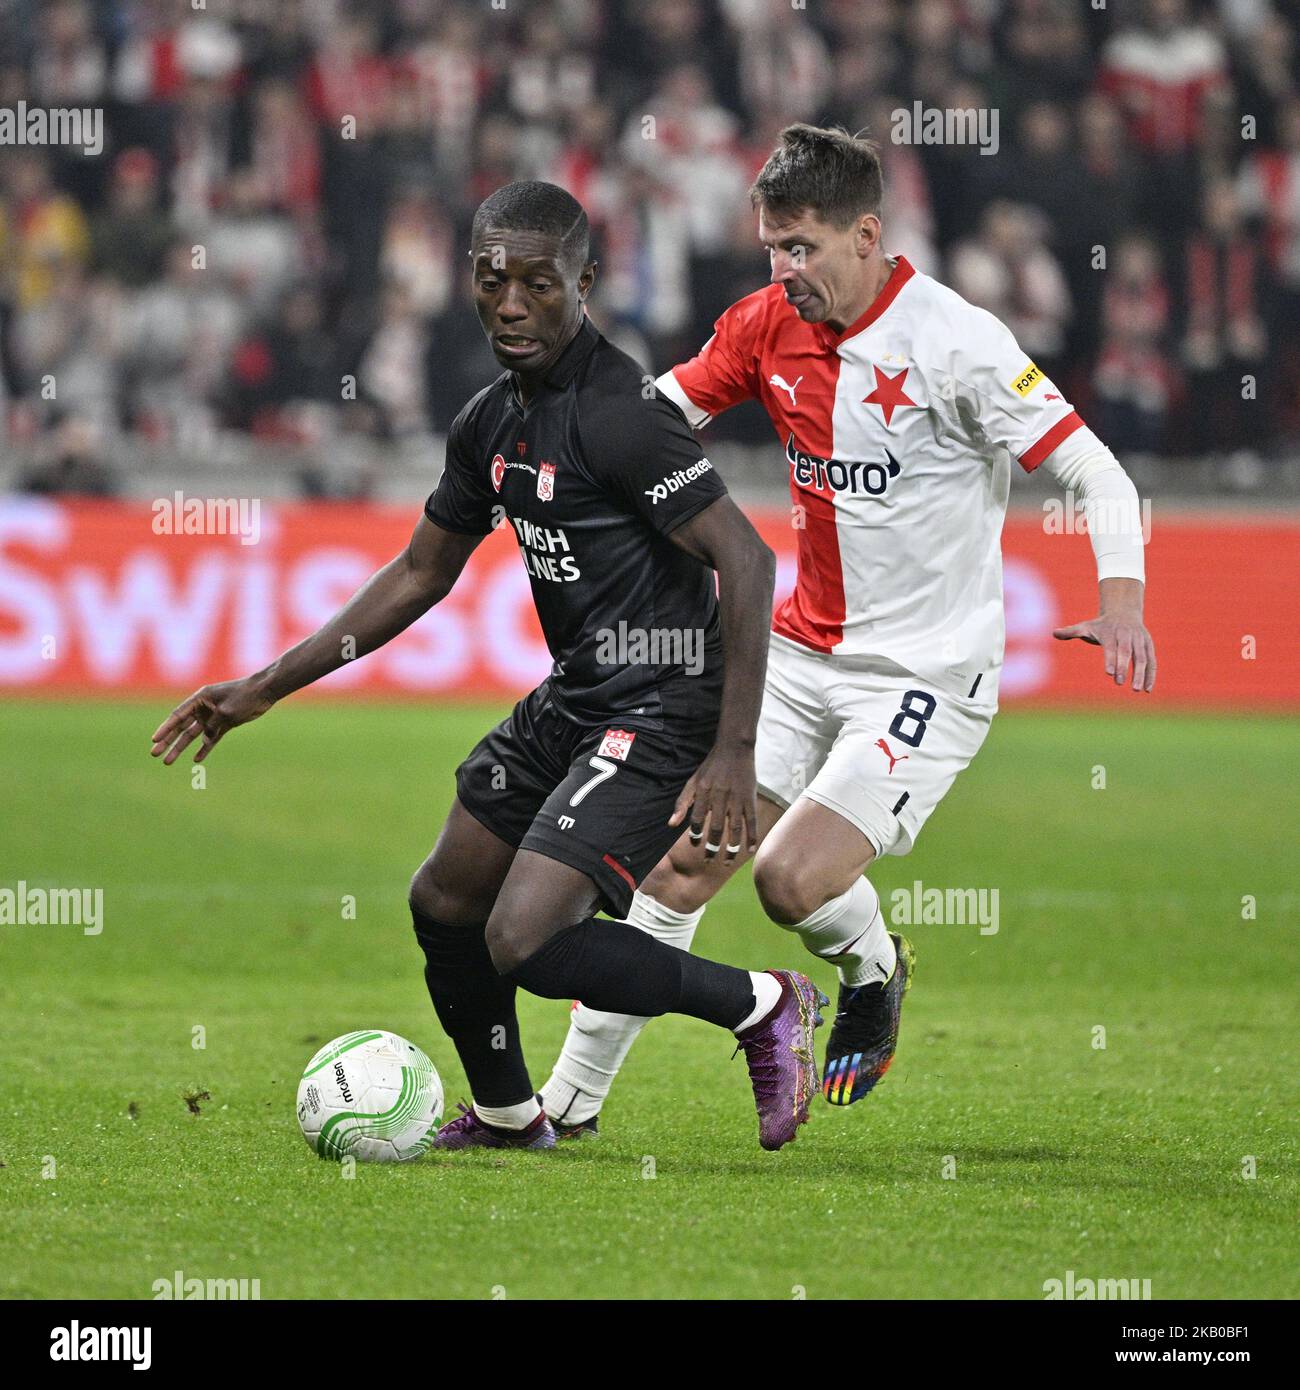 Prague, Czech Republic. 03rd Nov, 2022. L-R Max-Alain Gradel of Sivasspor and Lukas Masopust of Slavia in action during the Group G, 6th round soccer match of the European Conference League SK Slavia Praha vs Sivasspor, in Prague, Czech Republic, November 3, 2022. Credit: Vit Simanek/CTK Photo/Alamy Live News Stock Photo